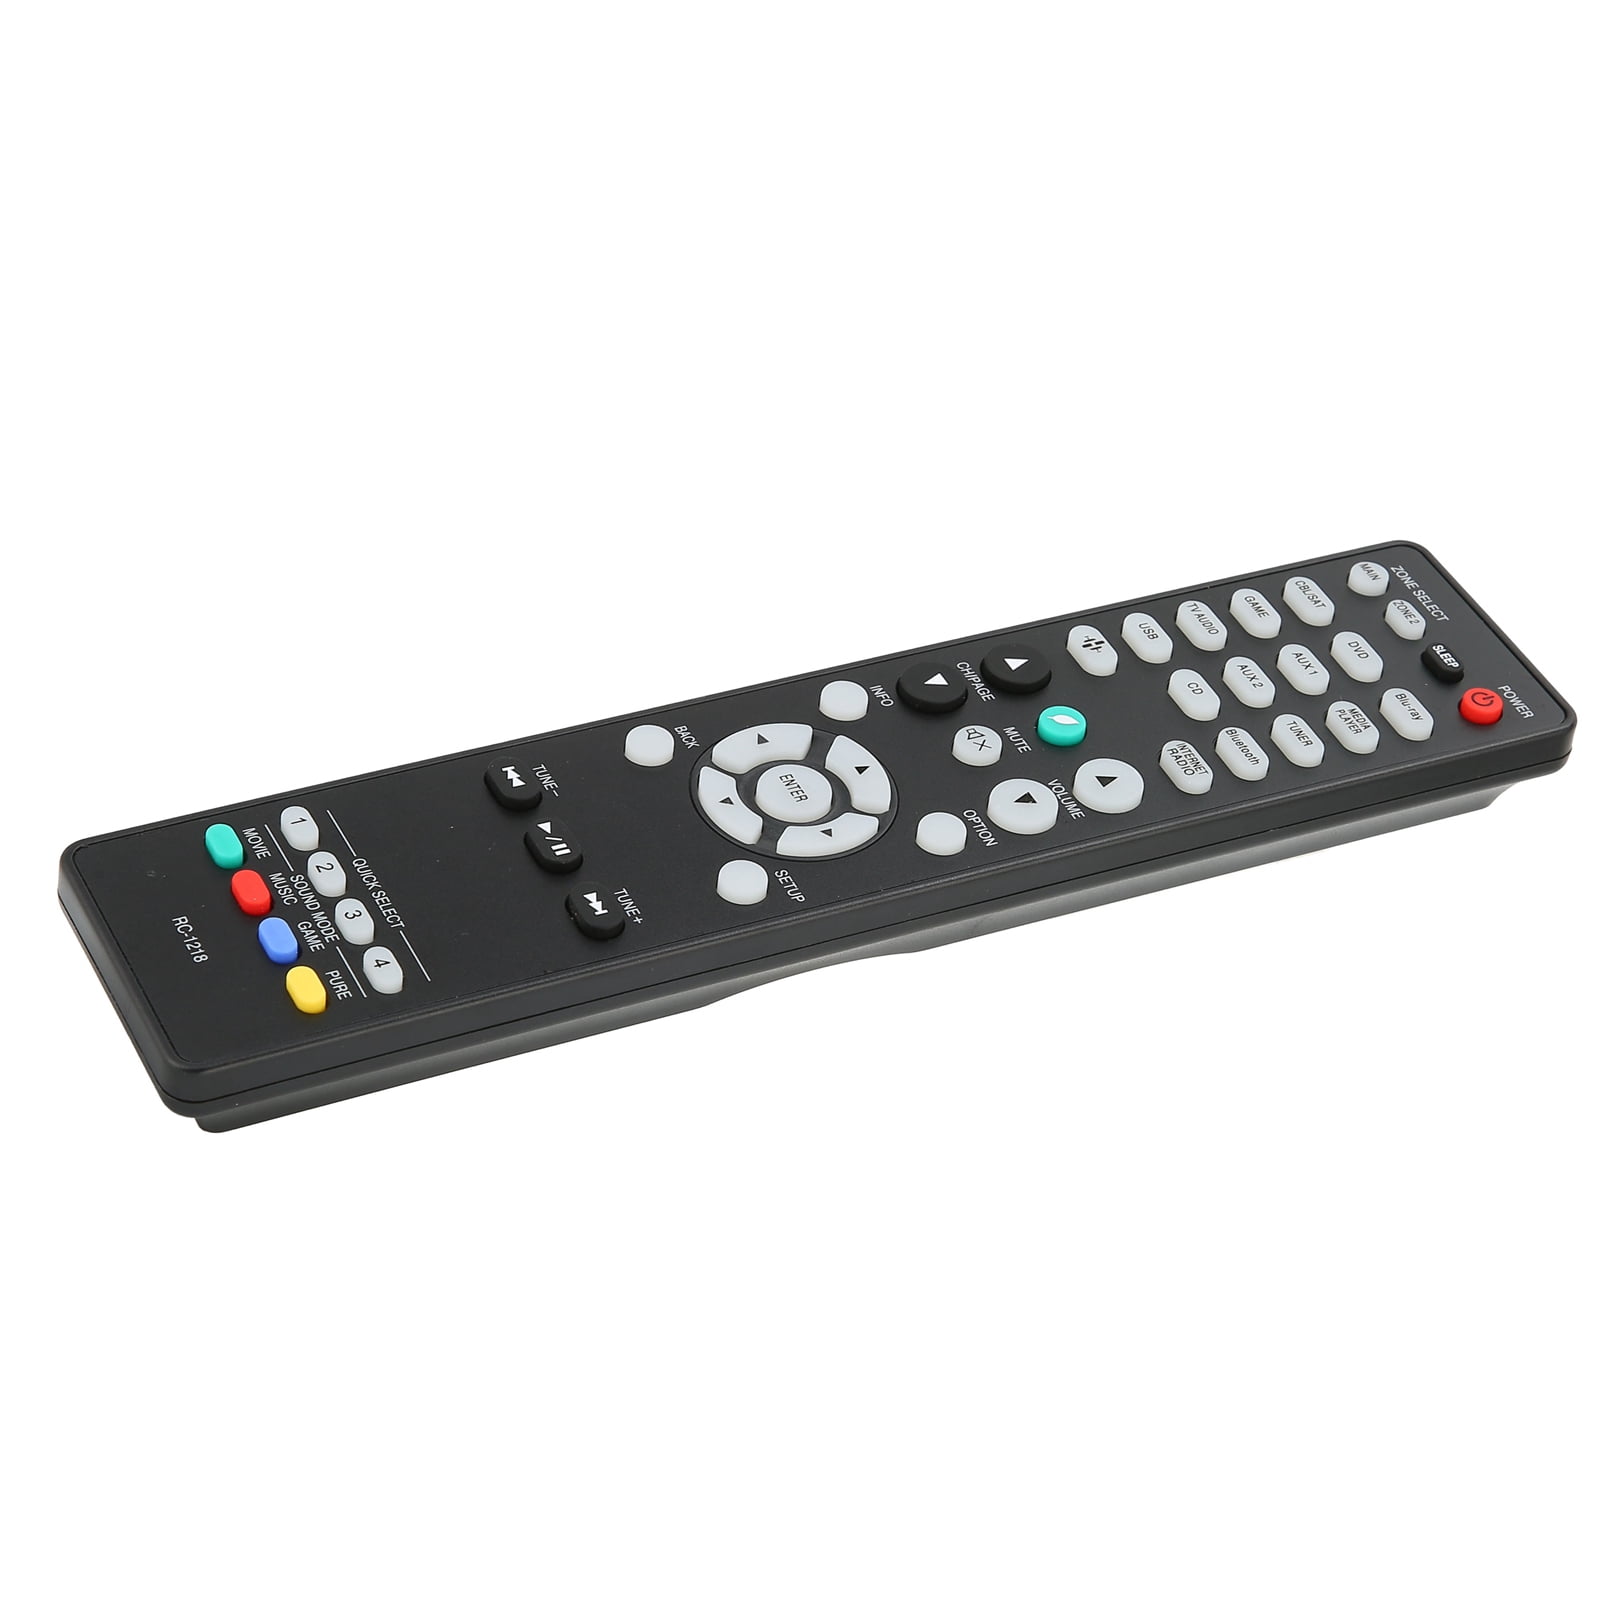 Fdit RC‑1218 Replacement Remote Control For AVR‑S730H AVR‑S930H AVR‑X1400H  Audio Video Receiver,Universal Remote Control,Remote Control For Video  Receiver - Walmart.com